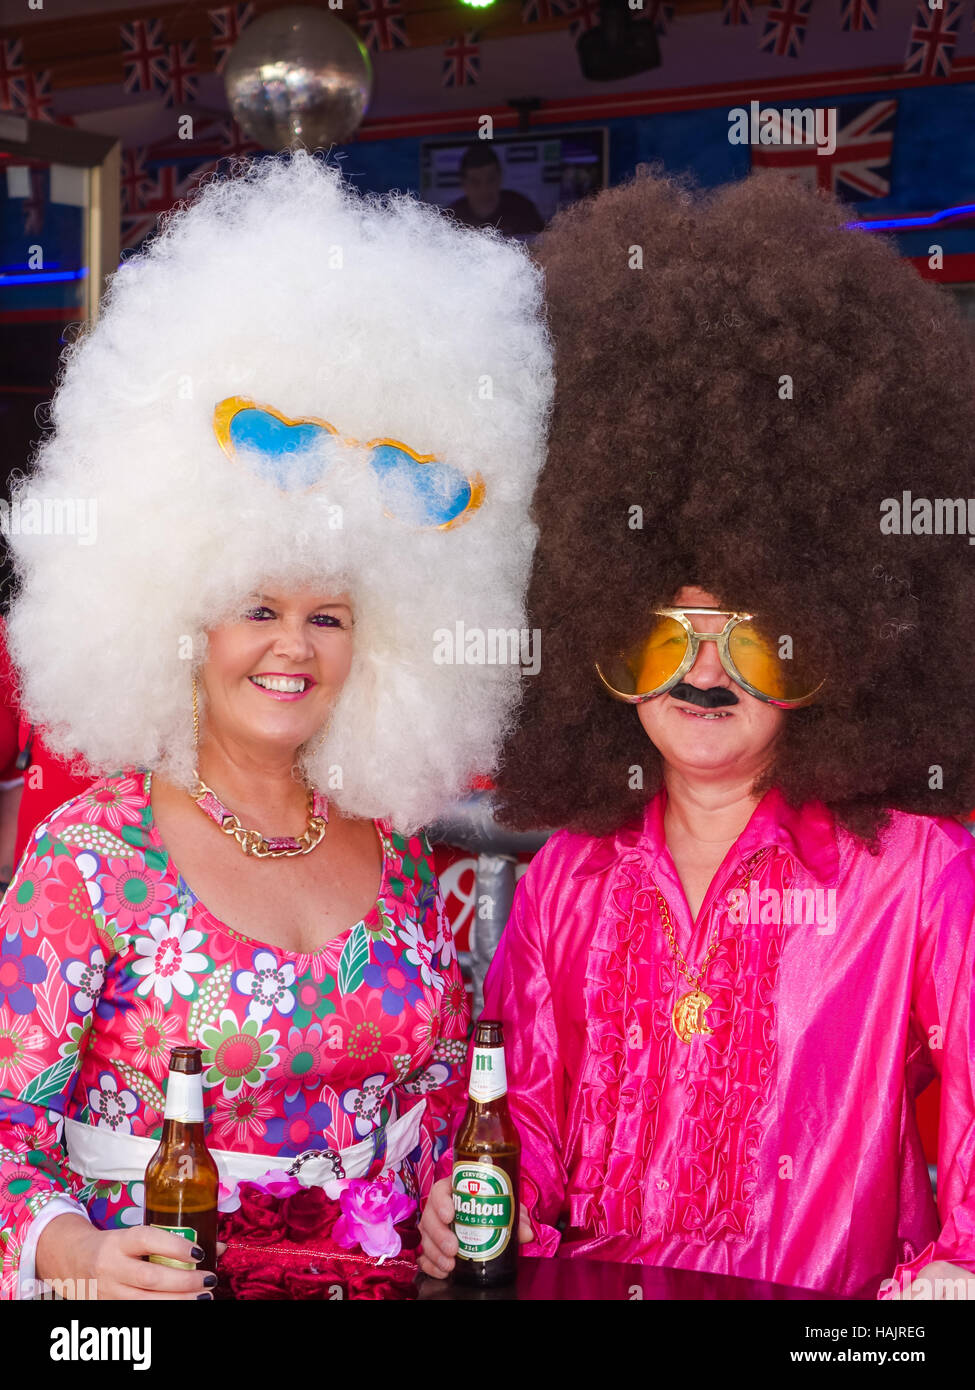 British fancy dress street party in Benidorm, Spain. Couple with massive giant afro wigs sixties sunglasses. Stock Photo